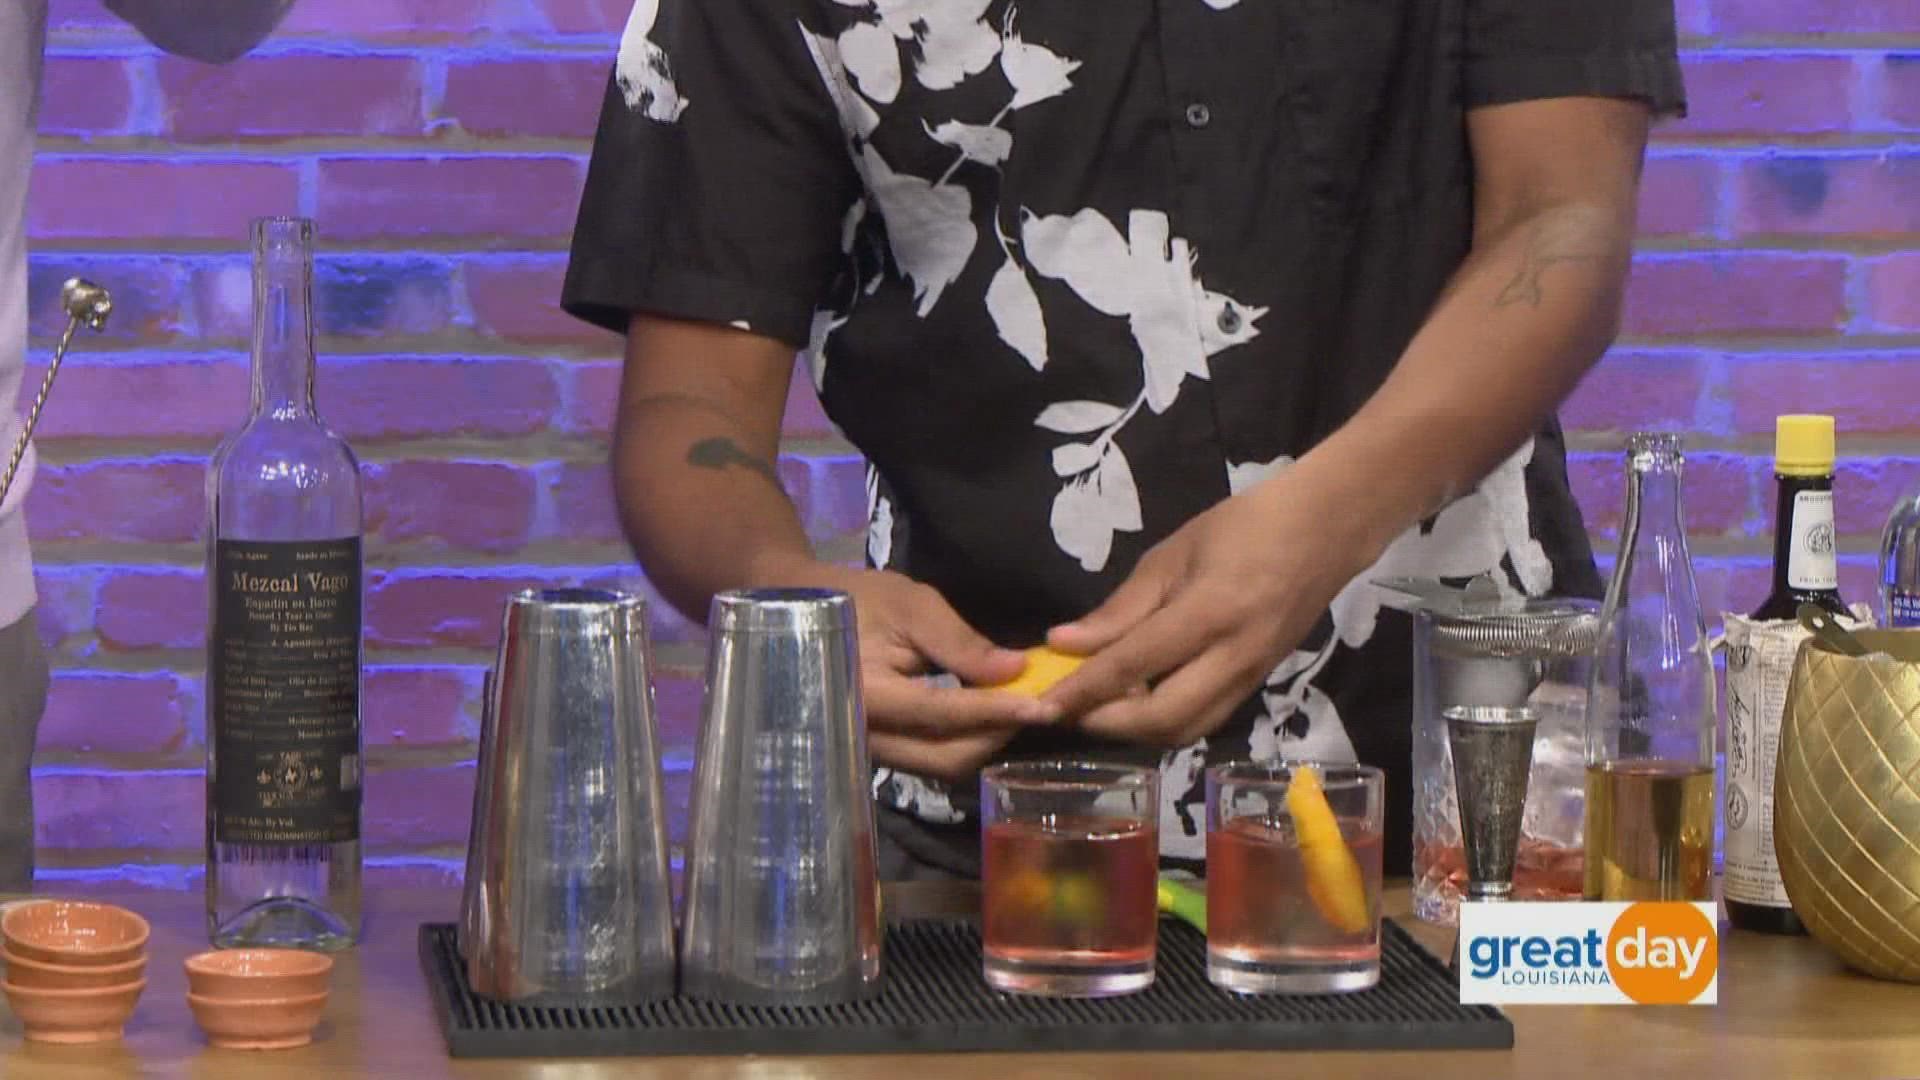 Alex Palumbo-Green from VALS stopped by to show us a mezcal cocktail that's perfect for the upcoming Saints game.